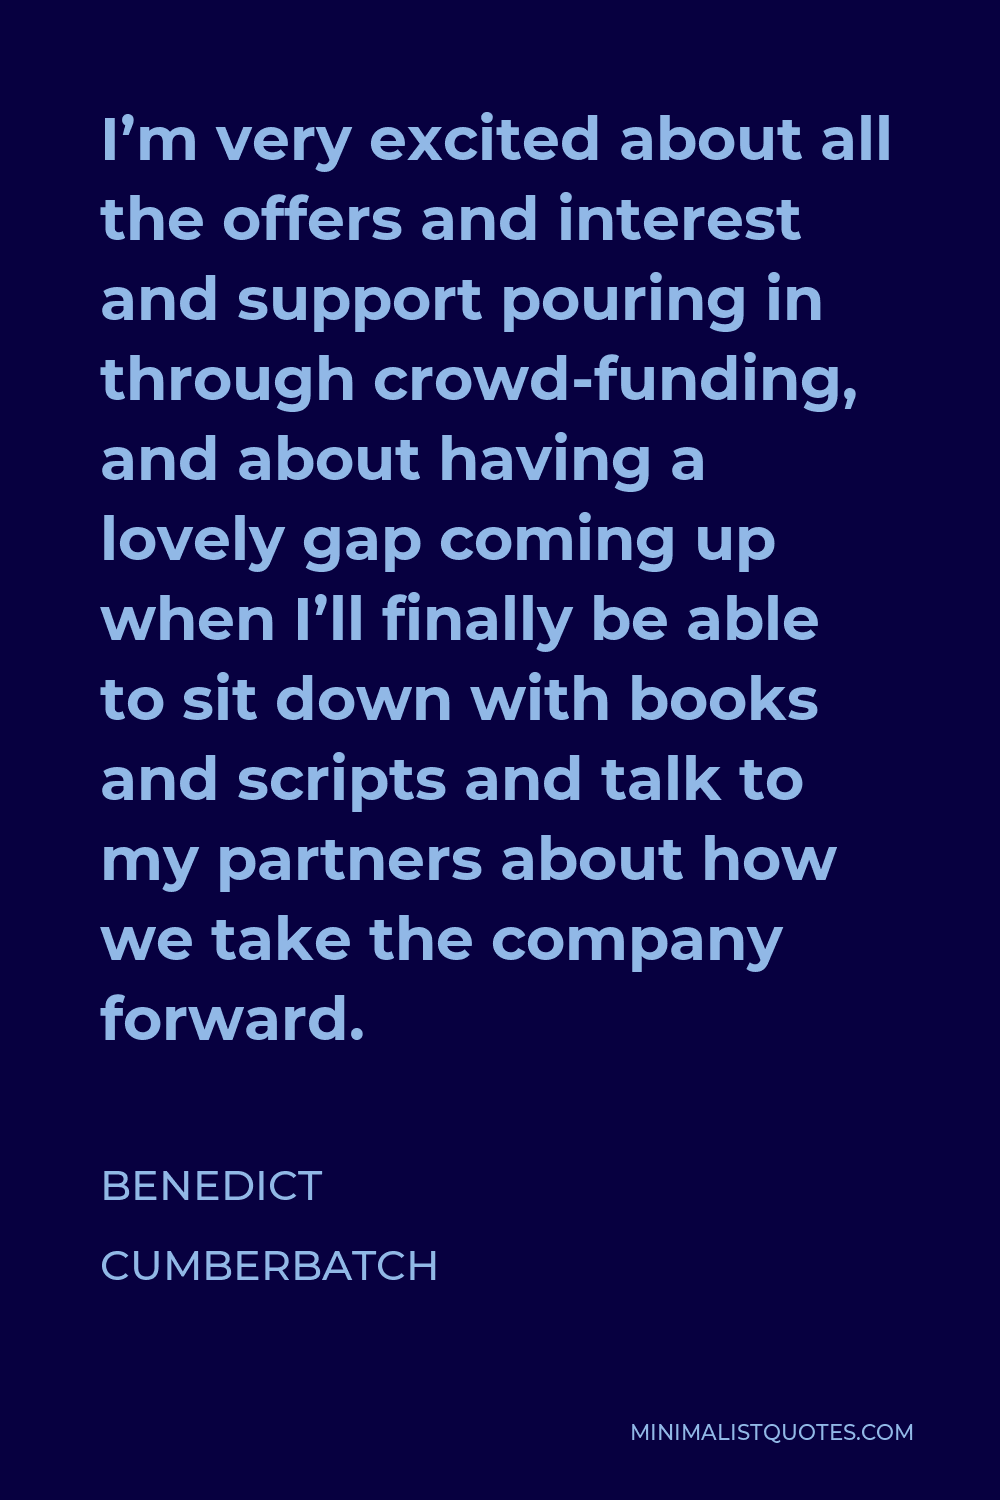 Benedict Cumberbatch Quote - I’m very excited about all the offers and interest and support pouring in through crowd-funding, and about having a lovely gap coming up when I’ll finally be able to sit down with books and scripts and talk to my partners about how we take the company forward.